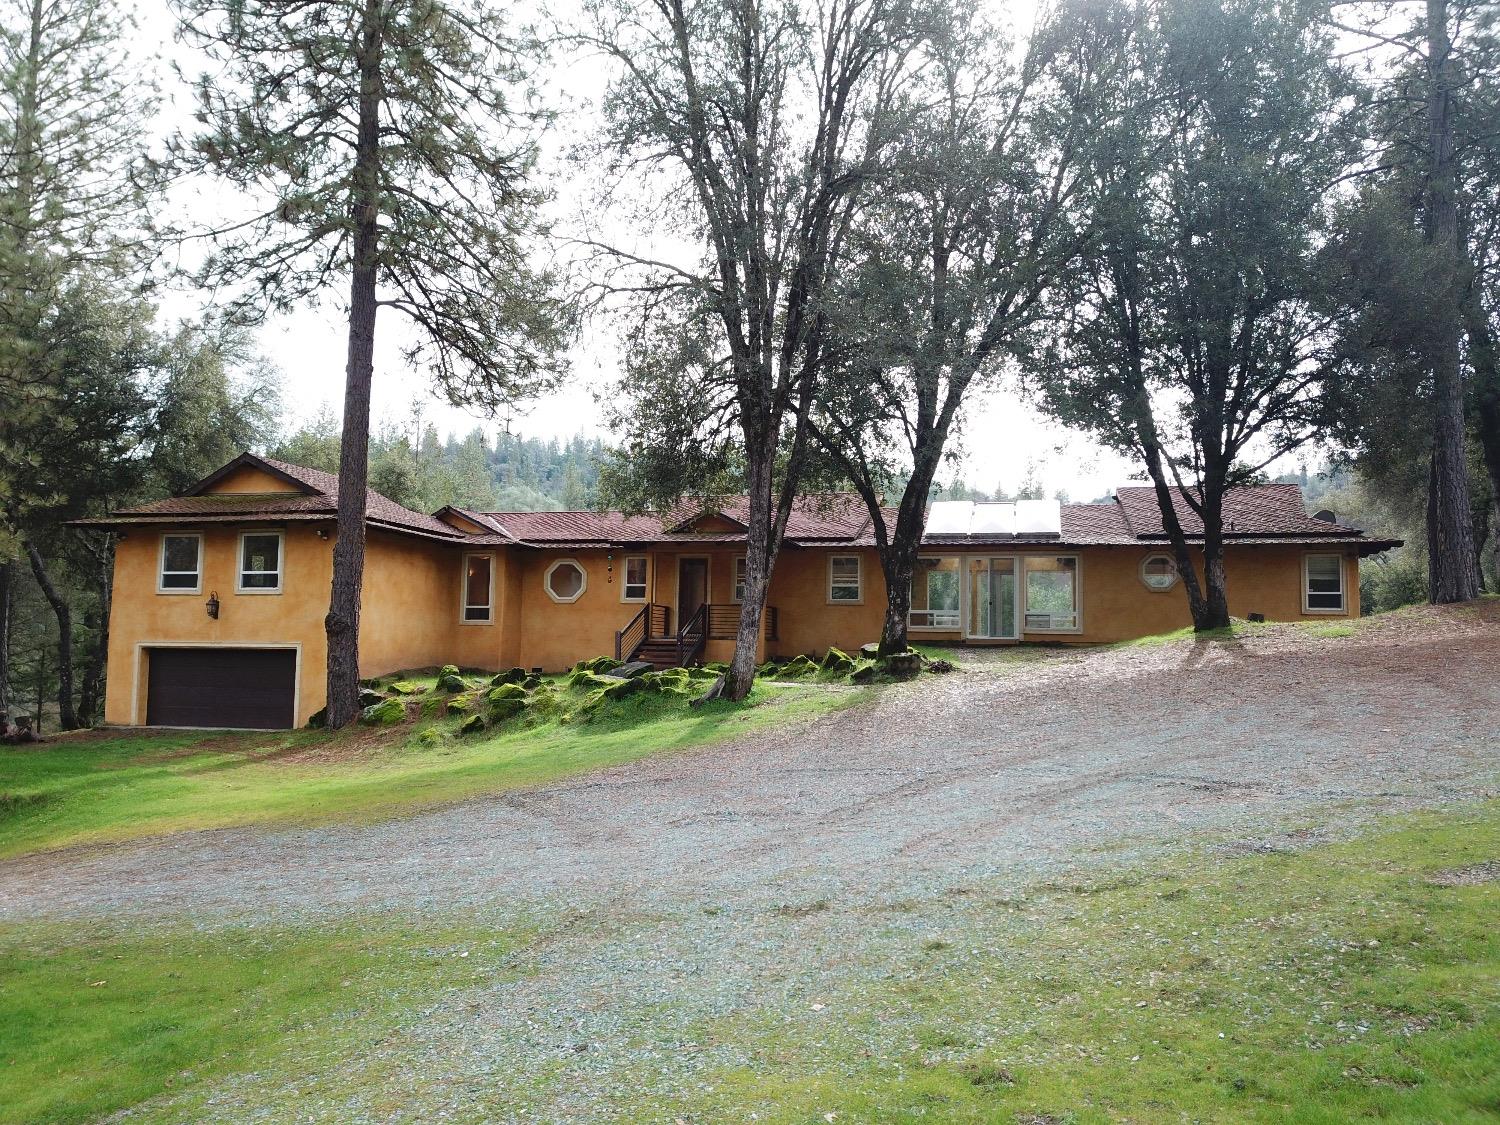 Photo of 6740 Morning Canyon Rd in Placerville, CA